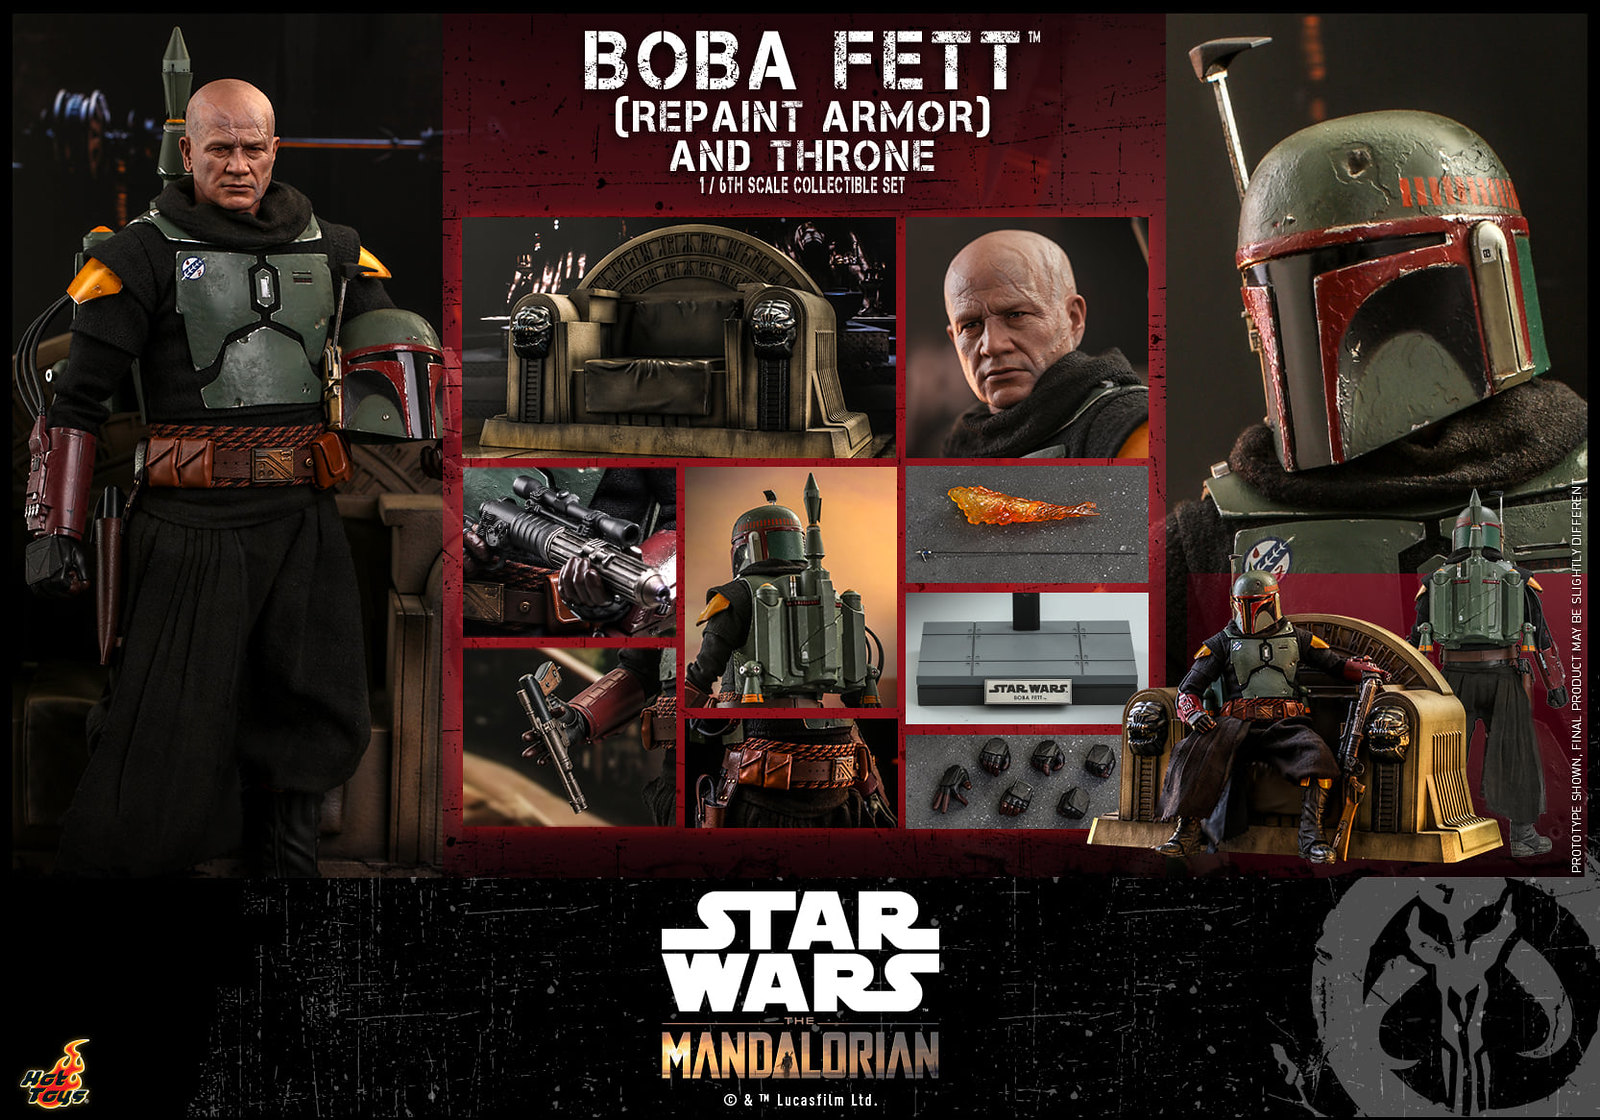 Star Wars: The Mandalorian™ - 1/6th scale Boba Fett™ (Repaint Armor) Collectible figure/ figure and Throne Collectible Set 51310549372_5cceb7670d_h